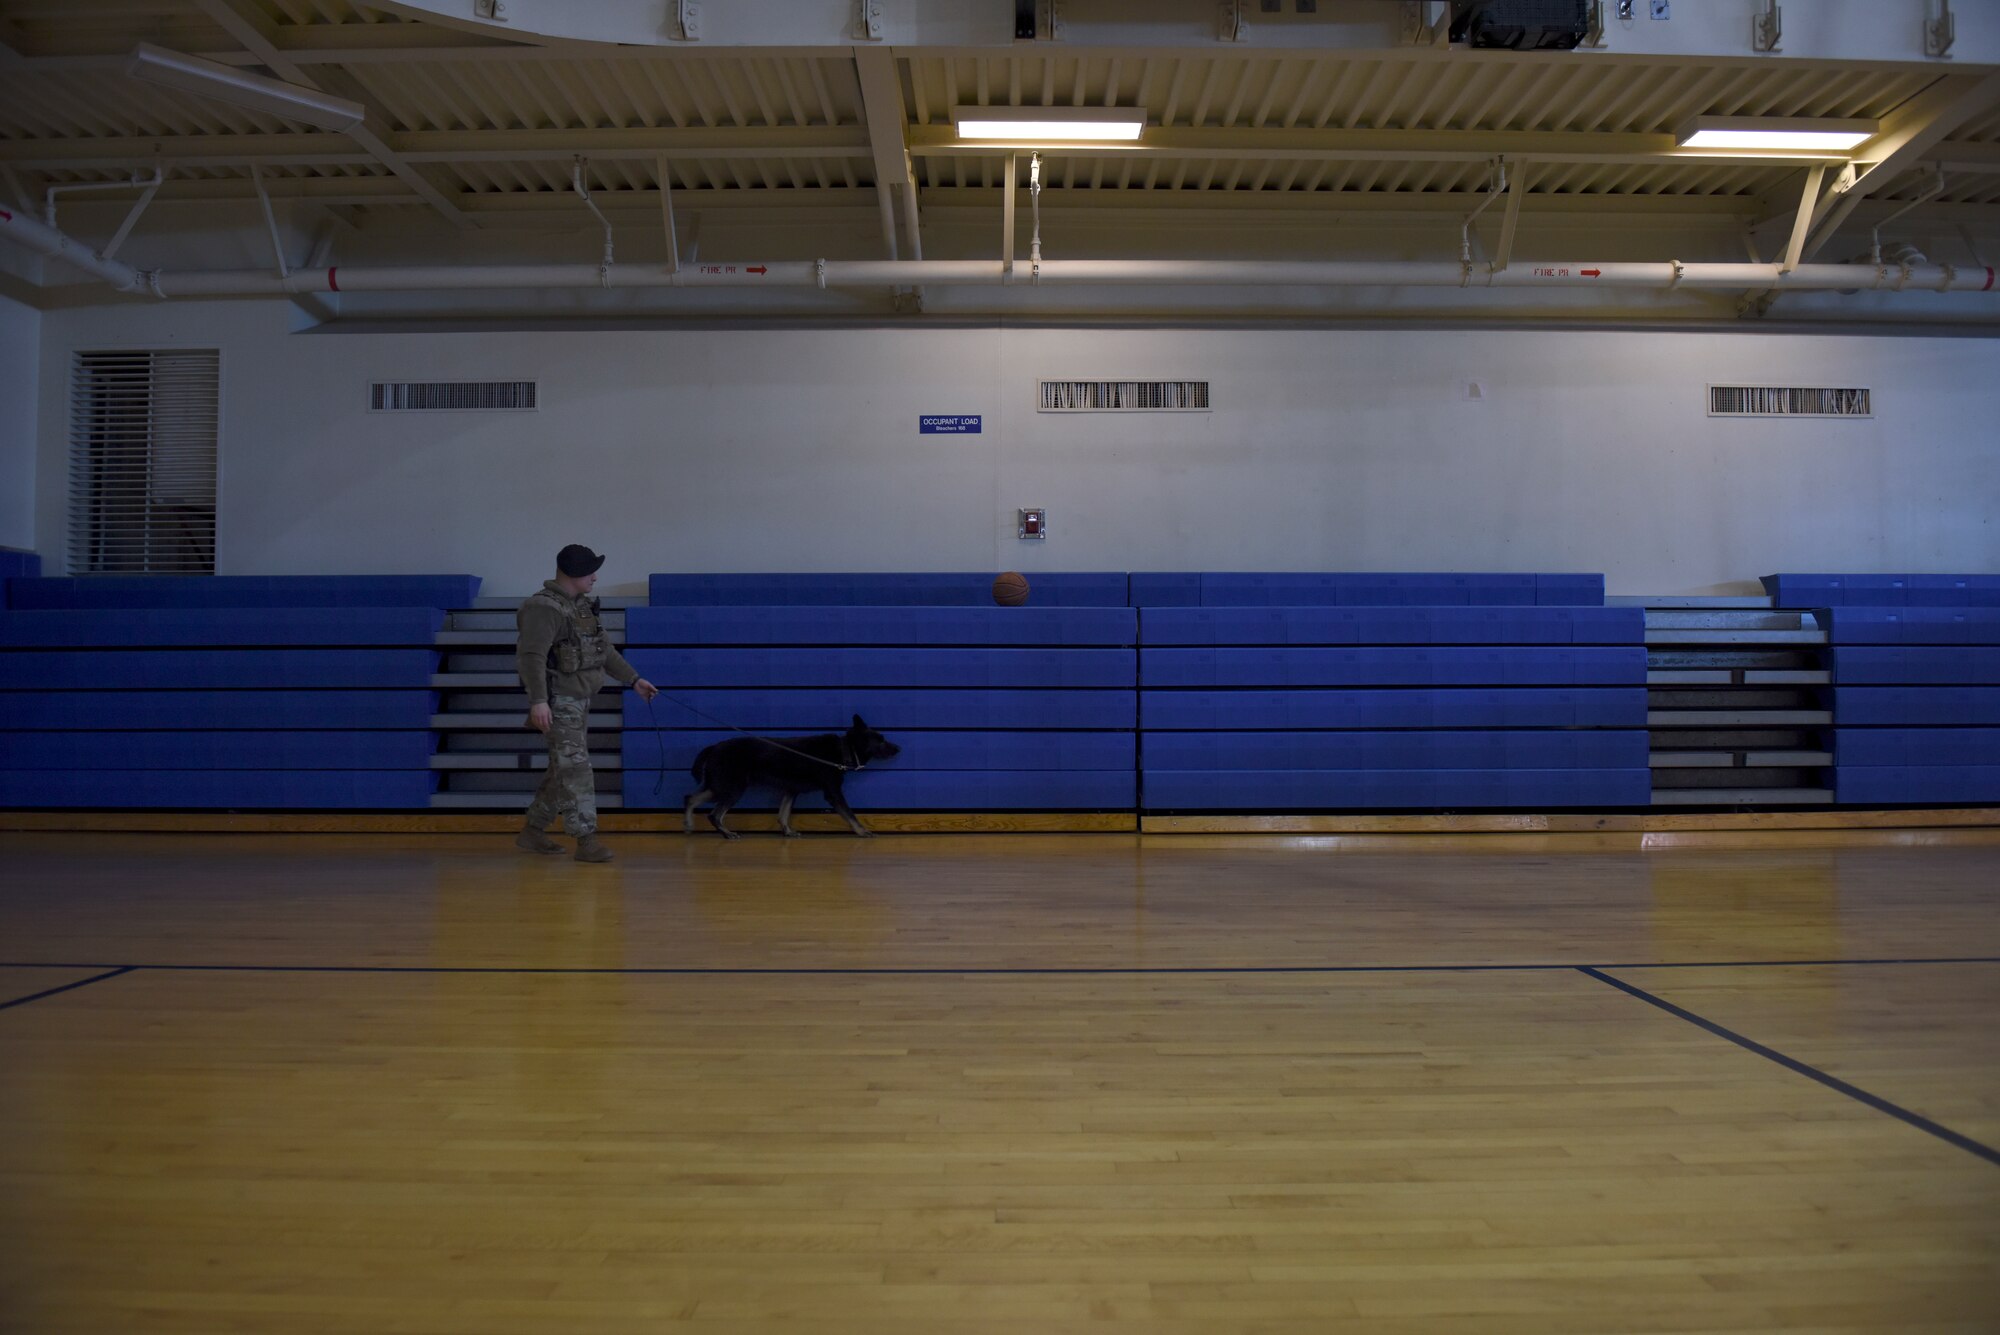 U.S. Air Force Staff Sgt. Roger Shaw, 8th Security Forces Squadron Military Working Dog handler, conducts routine detection and patrol work with MWD Alan at Kunsan Air Base, Republic of Korea, Dec. 12, 2019. The 8th SFS MWD section plays an integral role in base defense, including the detection of explosives and narcotics and deterrence. (U.S. Air Force photo by Staff Sgt. Mackenzie Mendez)